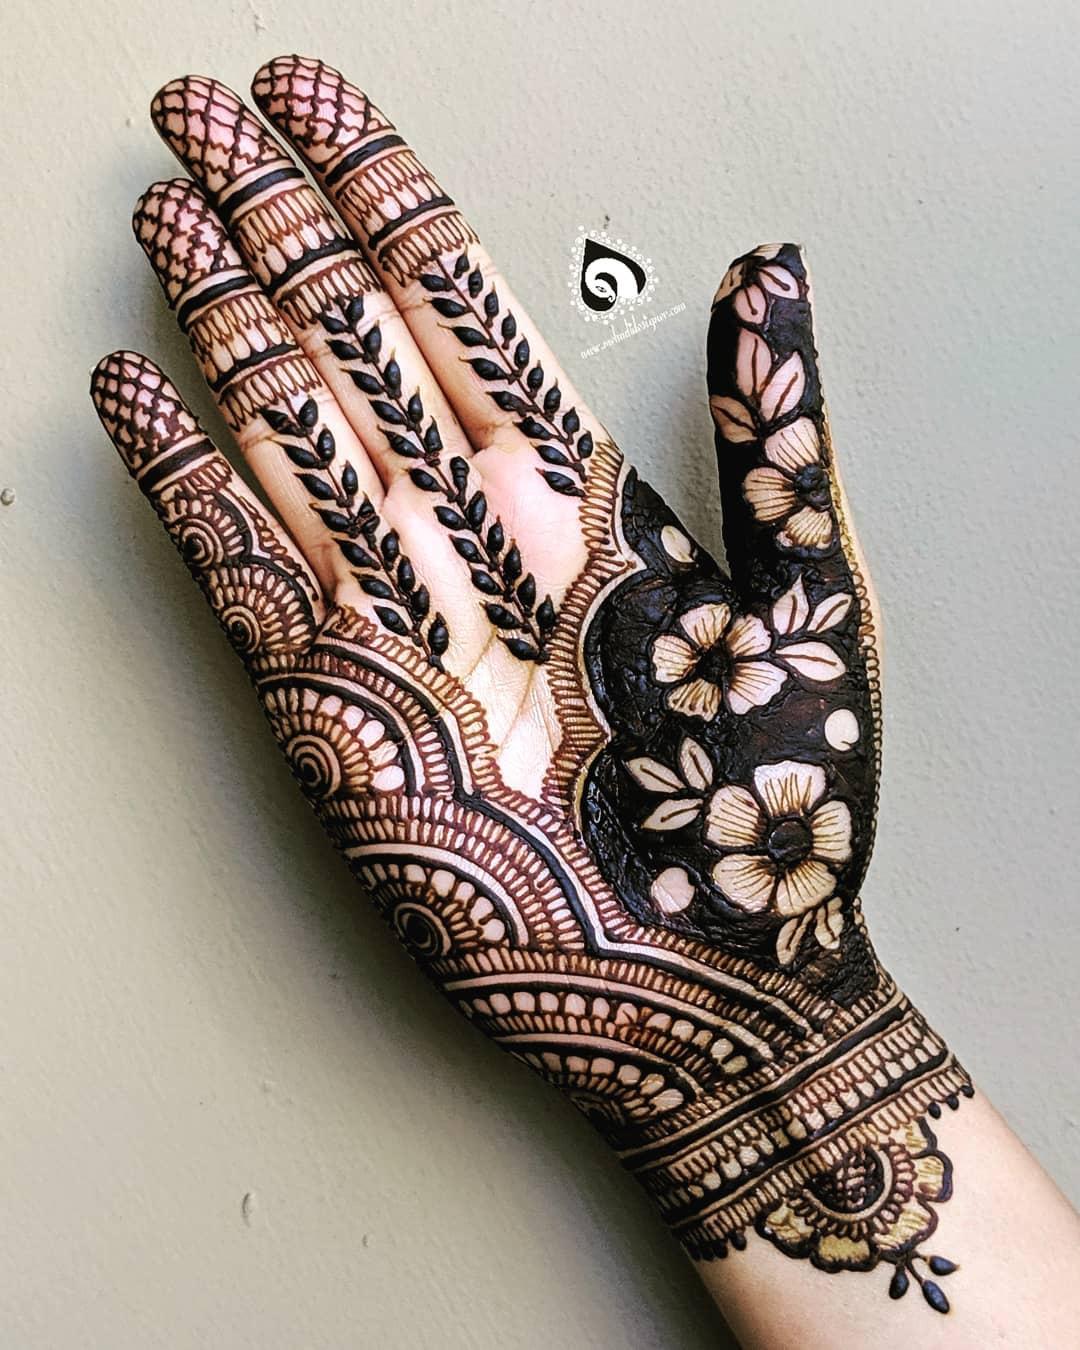 100+ Very Simple Mehndi Designs for Hands Images - TailoringinHindi